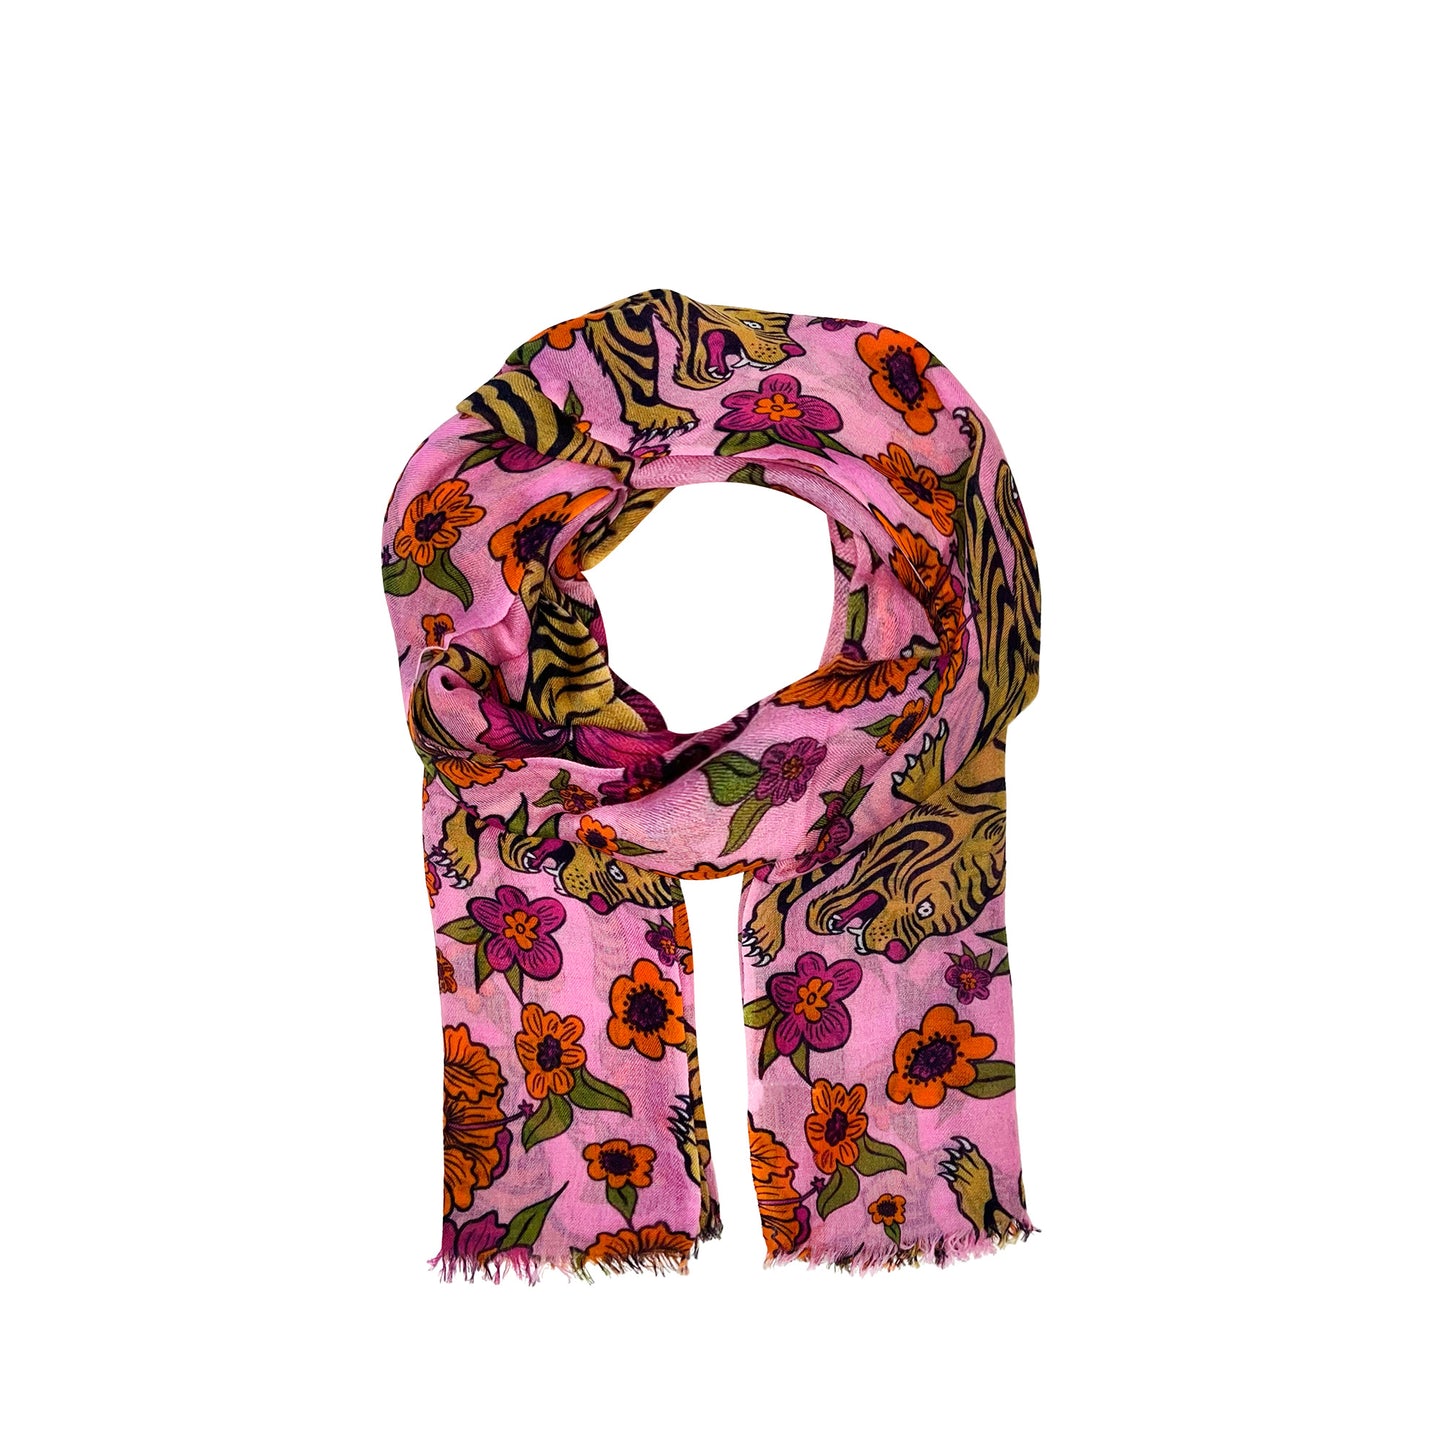 TIGER LILLY CASHMERE SCARF